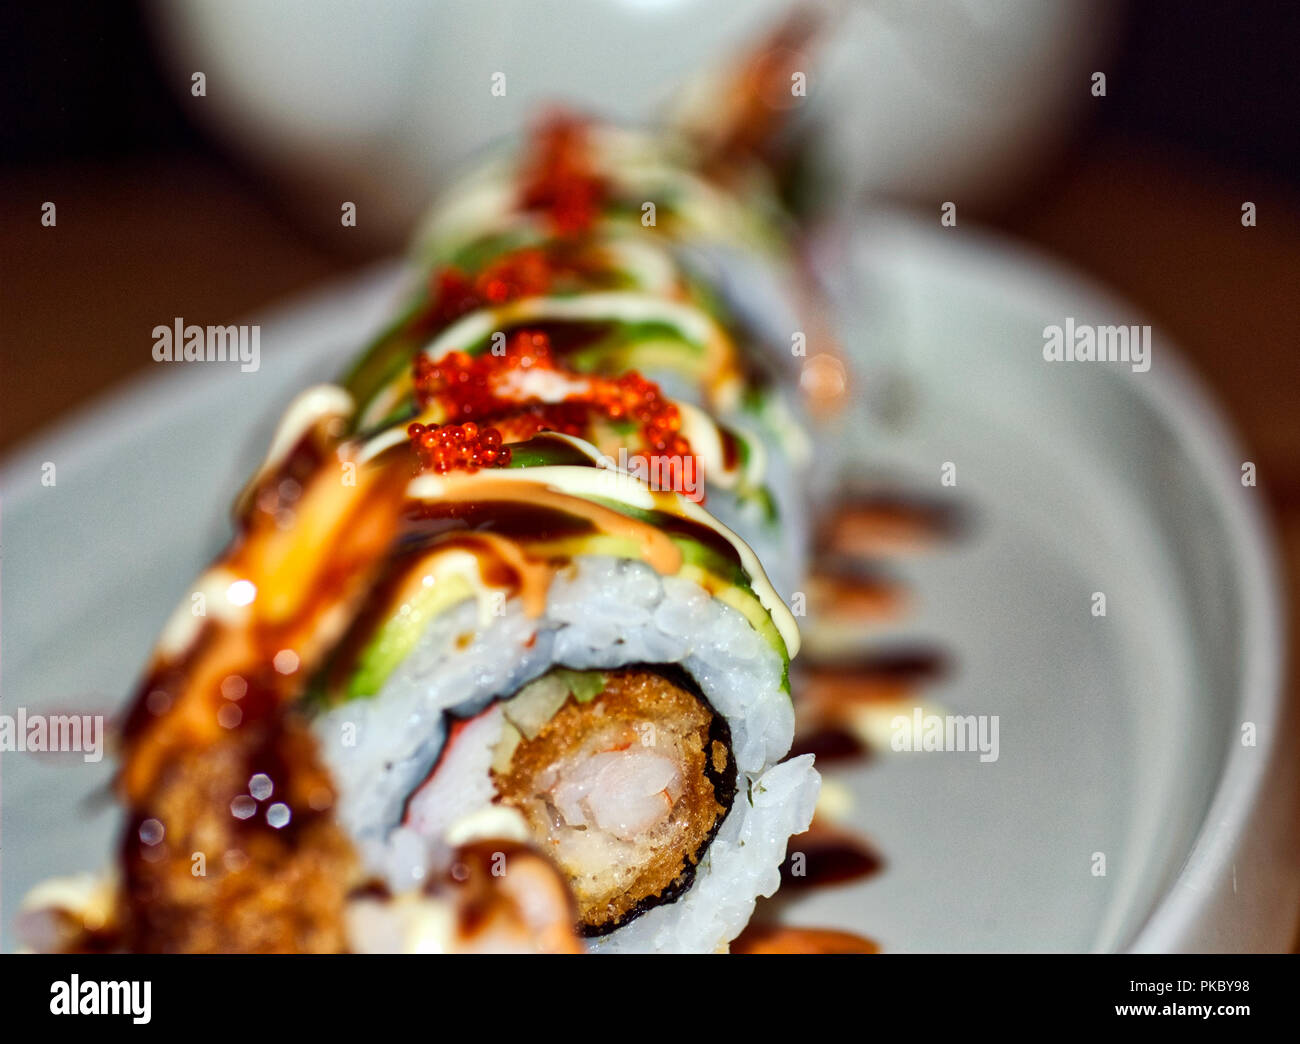 Delicious sushi roll, plated nicely with extravagant sauces. Stock Photo